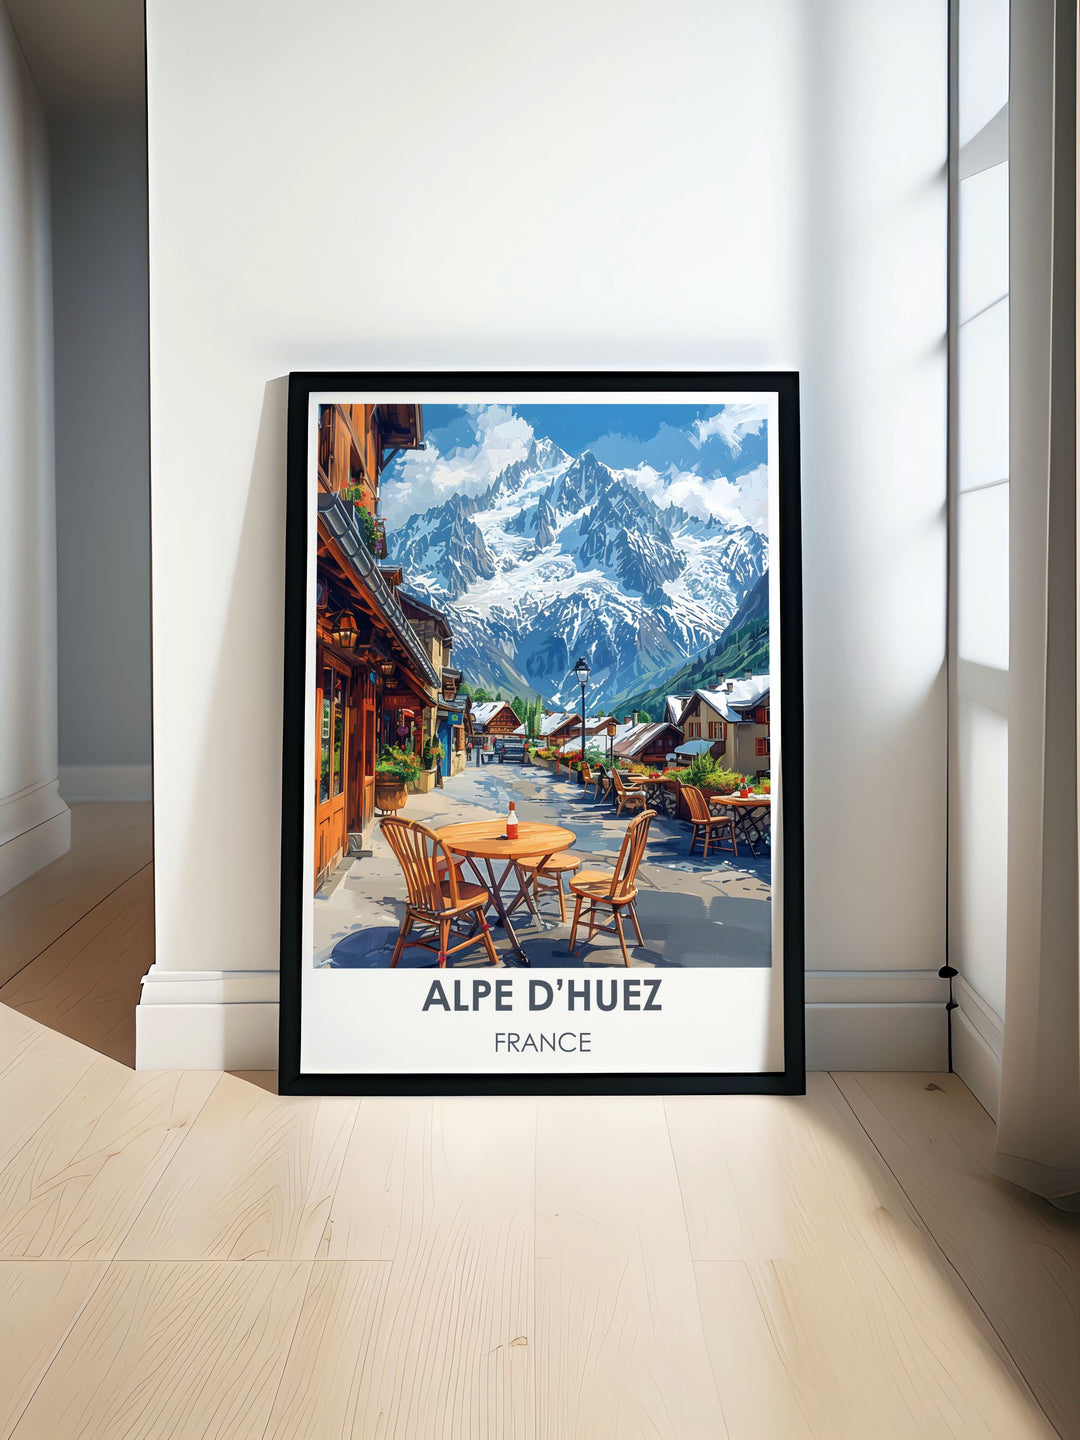 Gallery wall art of LAlpe dHuez Village capturing the vibrant life and winter atmosphere of this famous French ski resort.